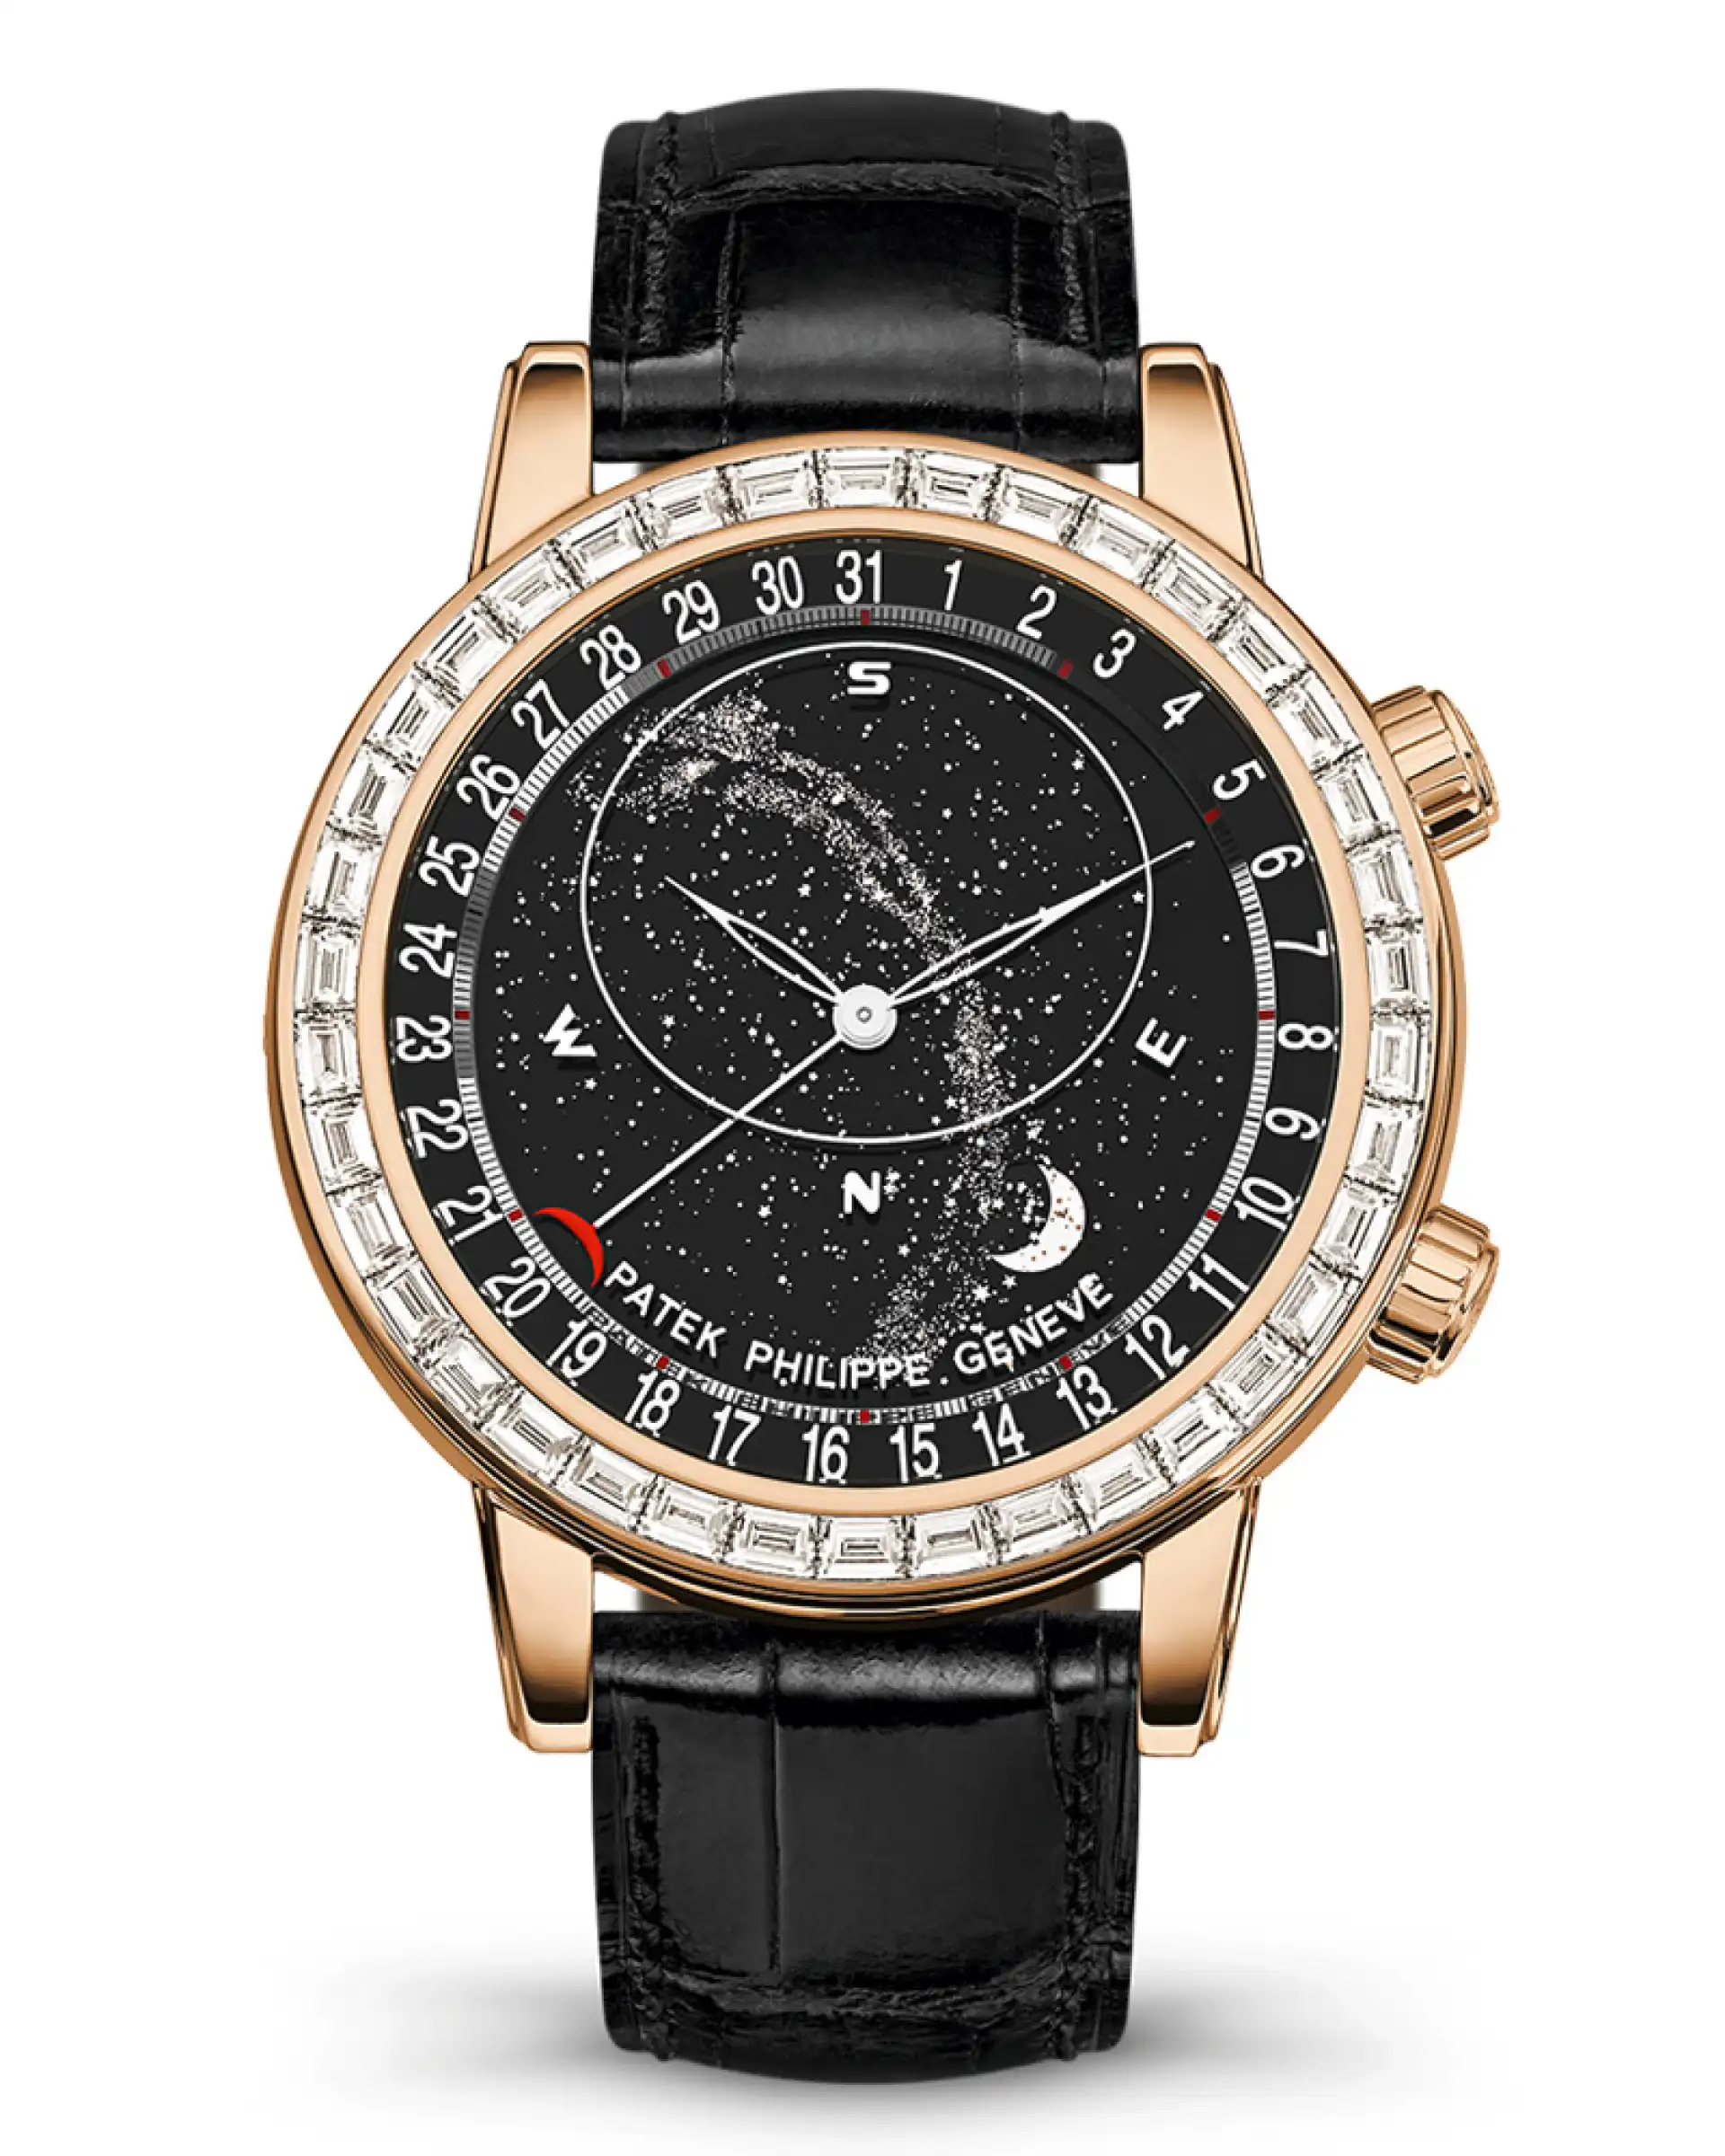 Patek Philippe Celestial Moon Age 6104r 001 At Cortina Watch Frontal